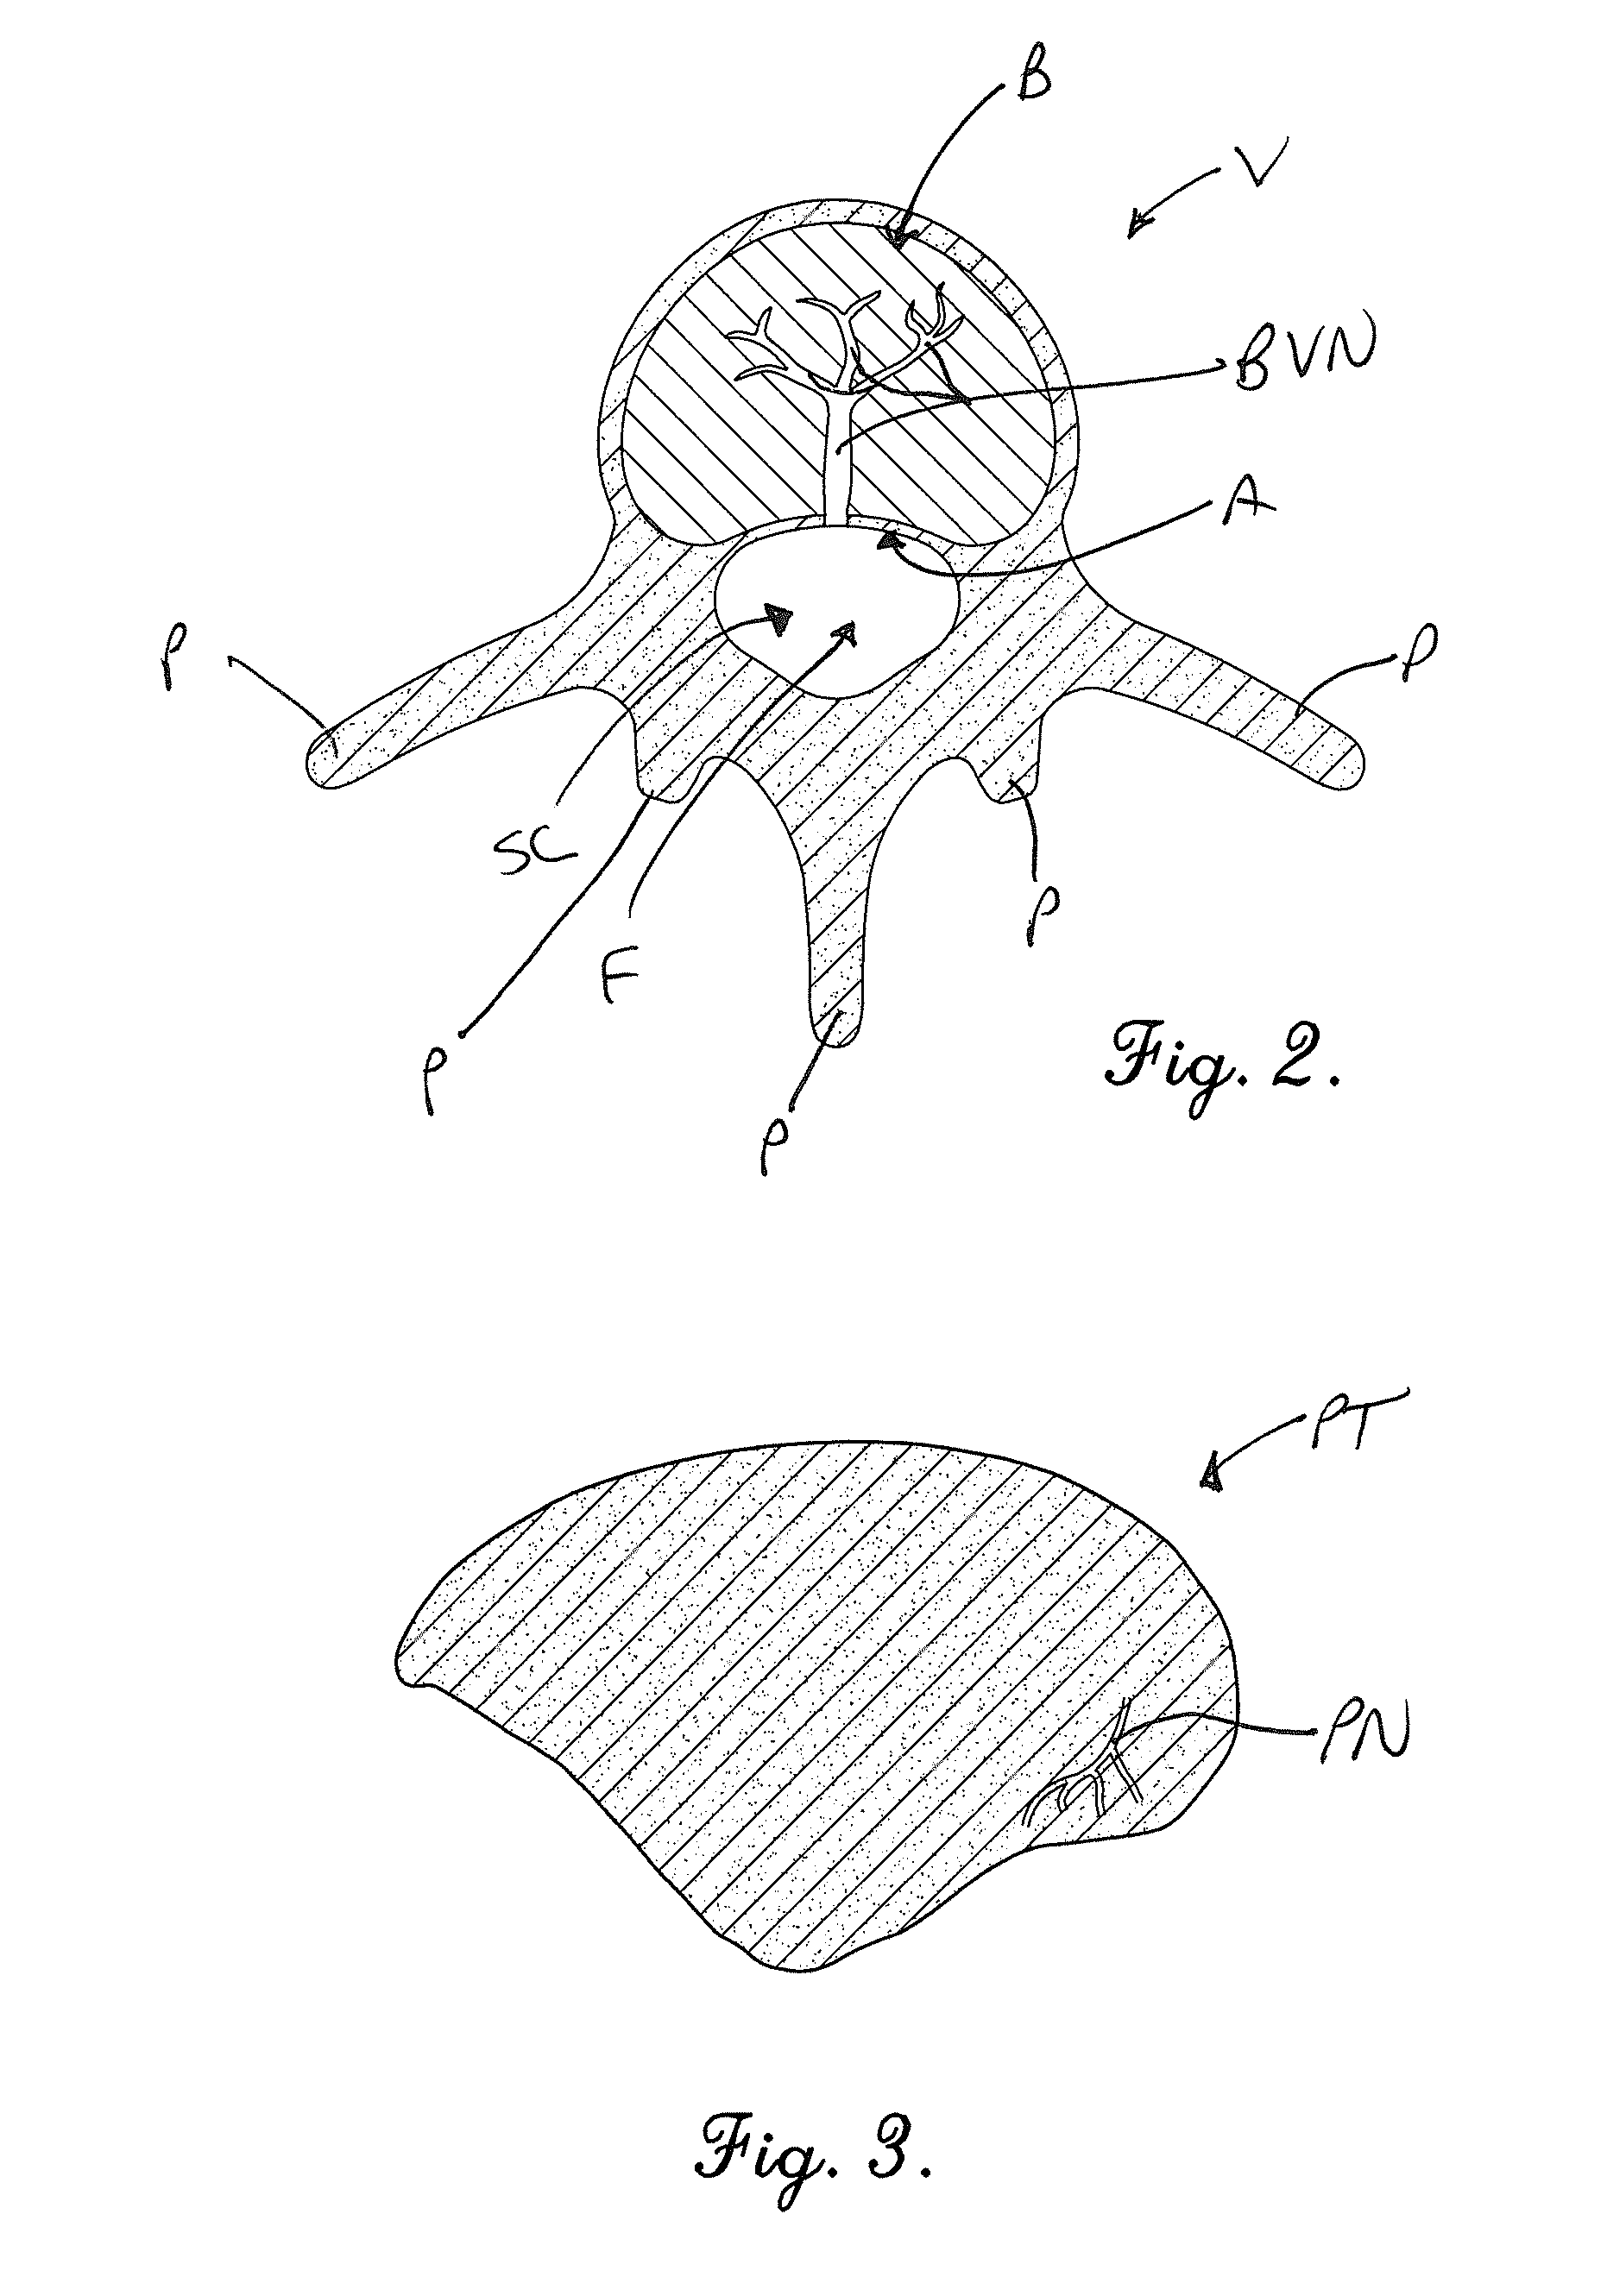 Device and method for alleviation of pain